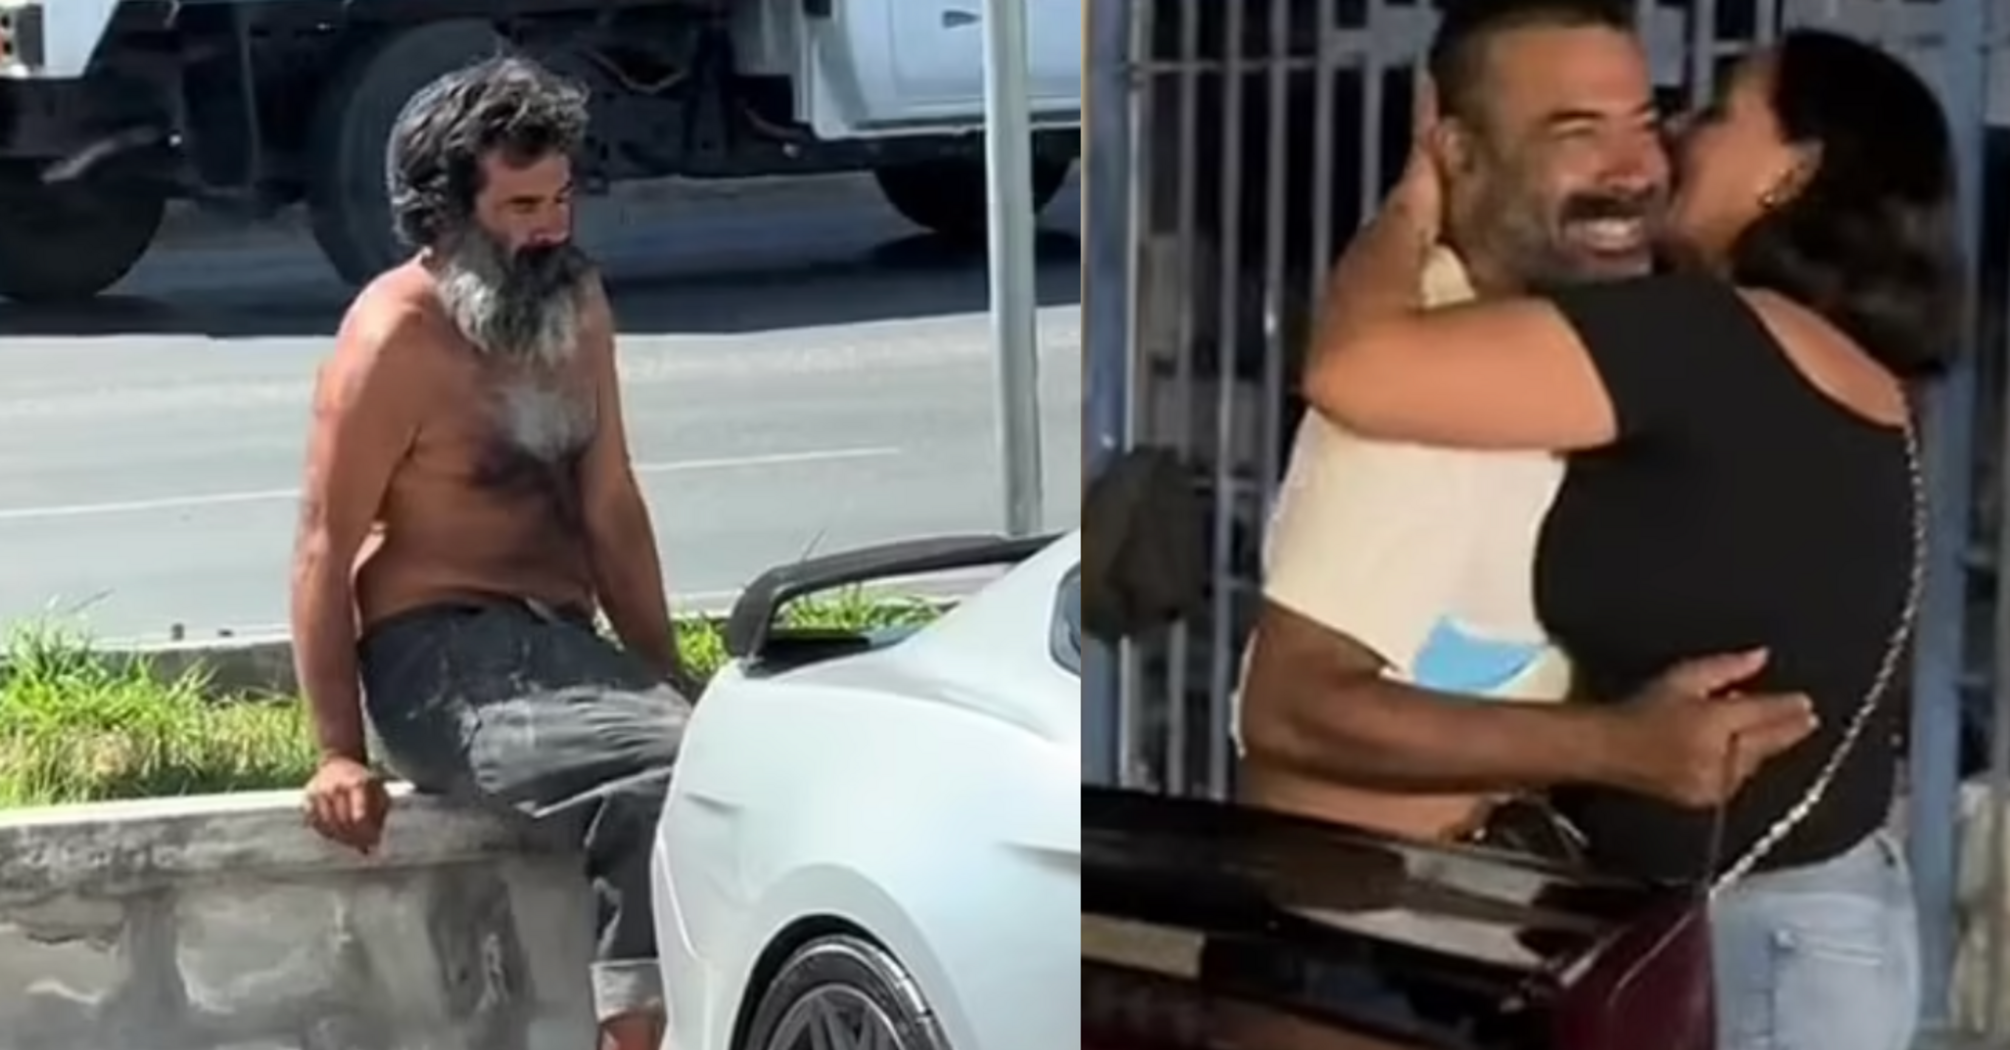 A woman saw a video on TikTok with a homeless man and recognized her brother